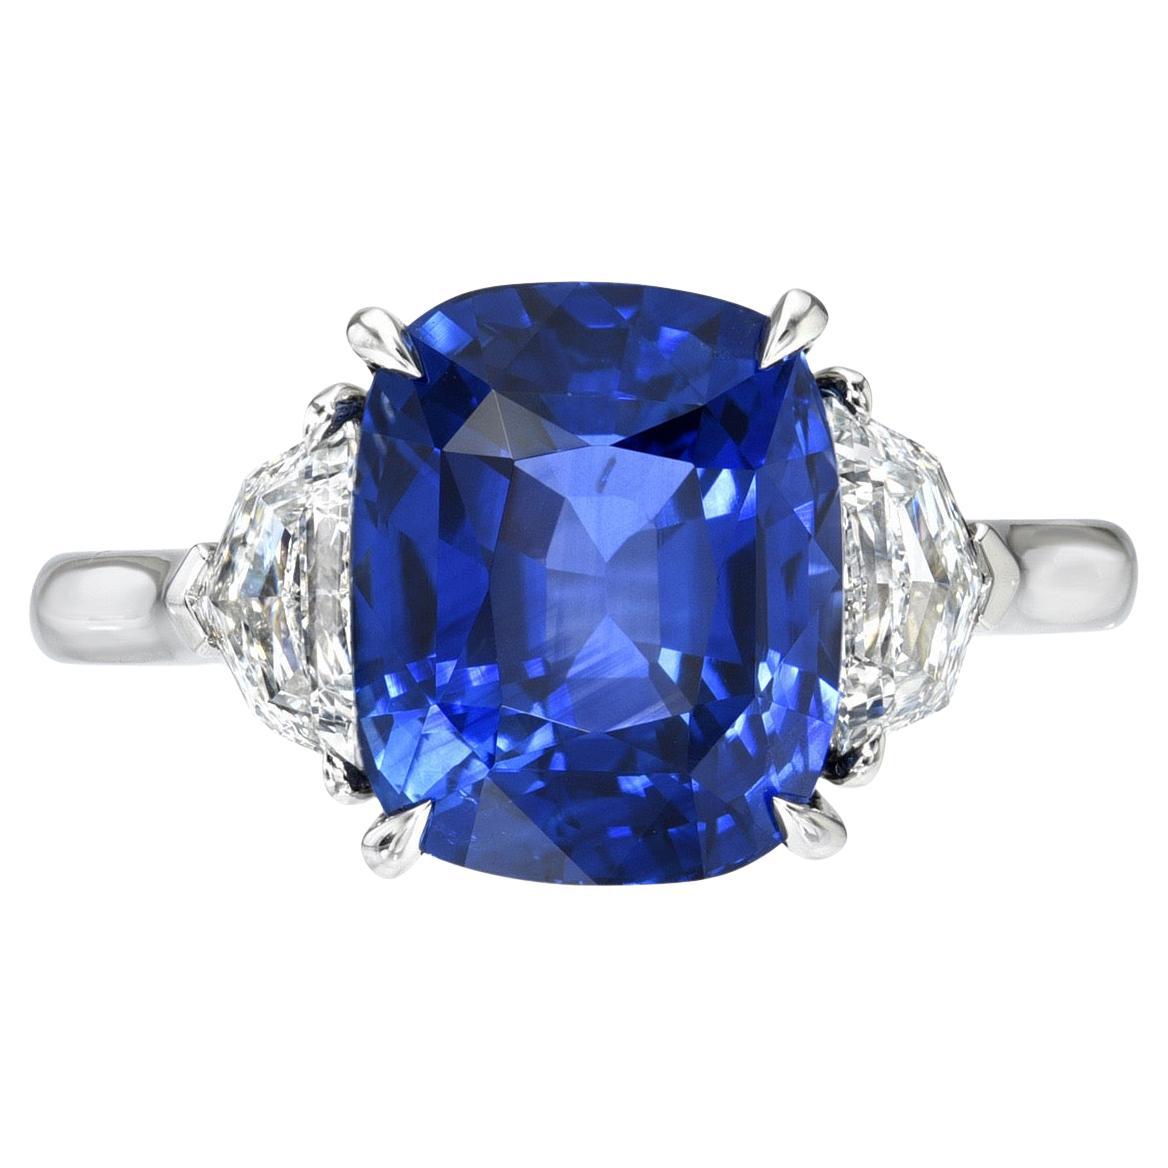 Sapphire Ring 6.05 Carat Cushion For Sale